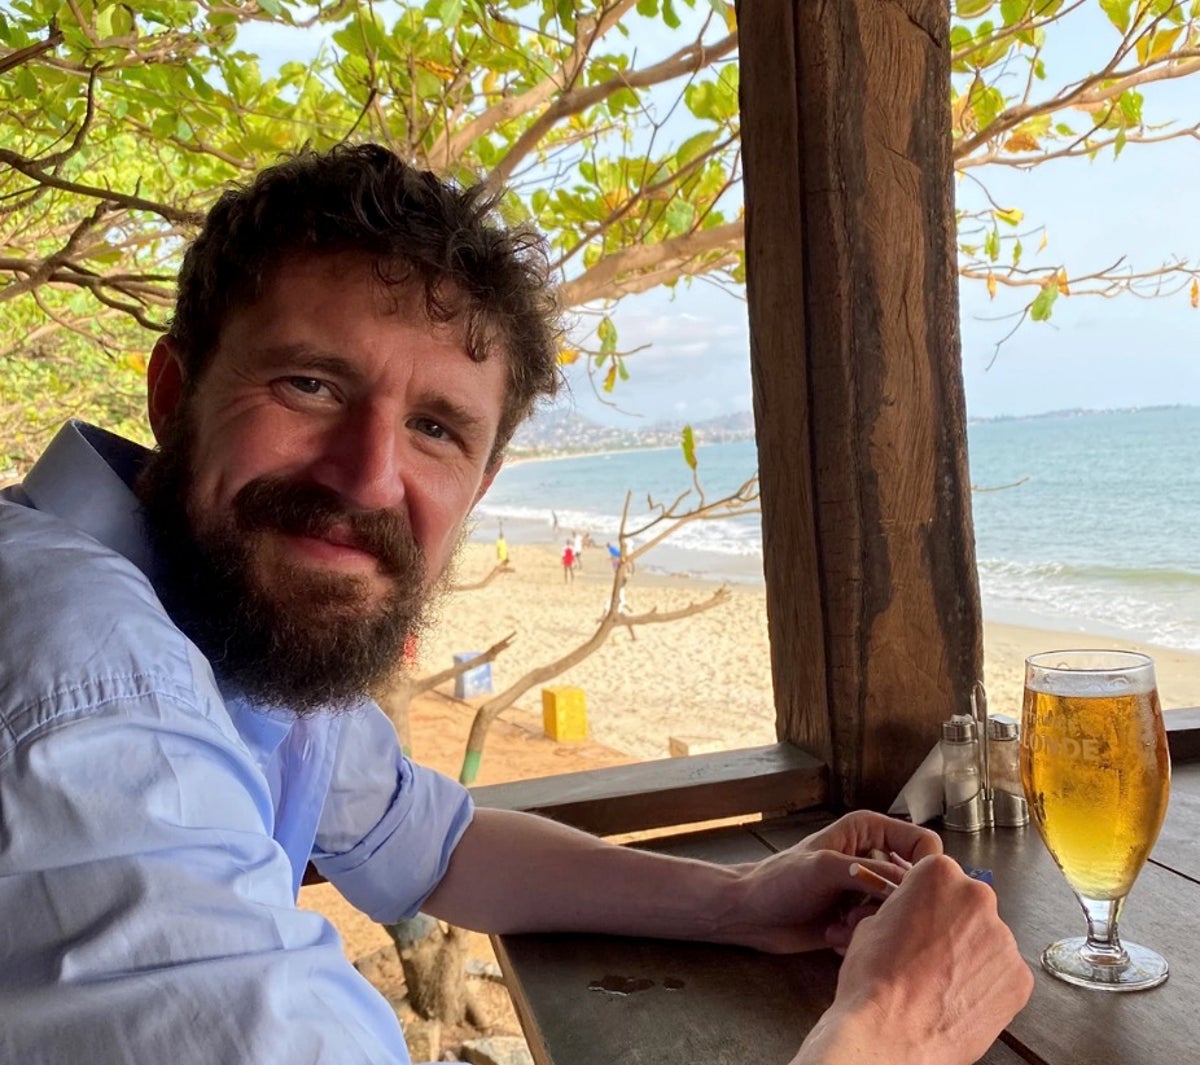 ‘Inspirational’ aid worker Simon Boas dies of cancer just hours before he was due to meet the King